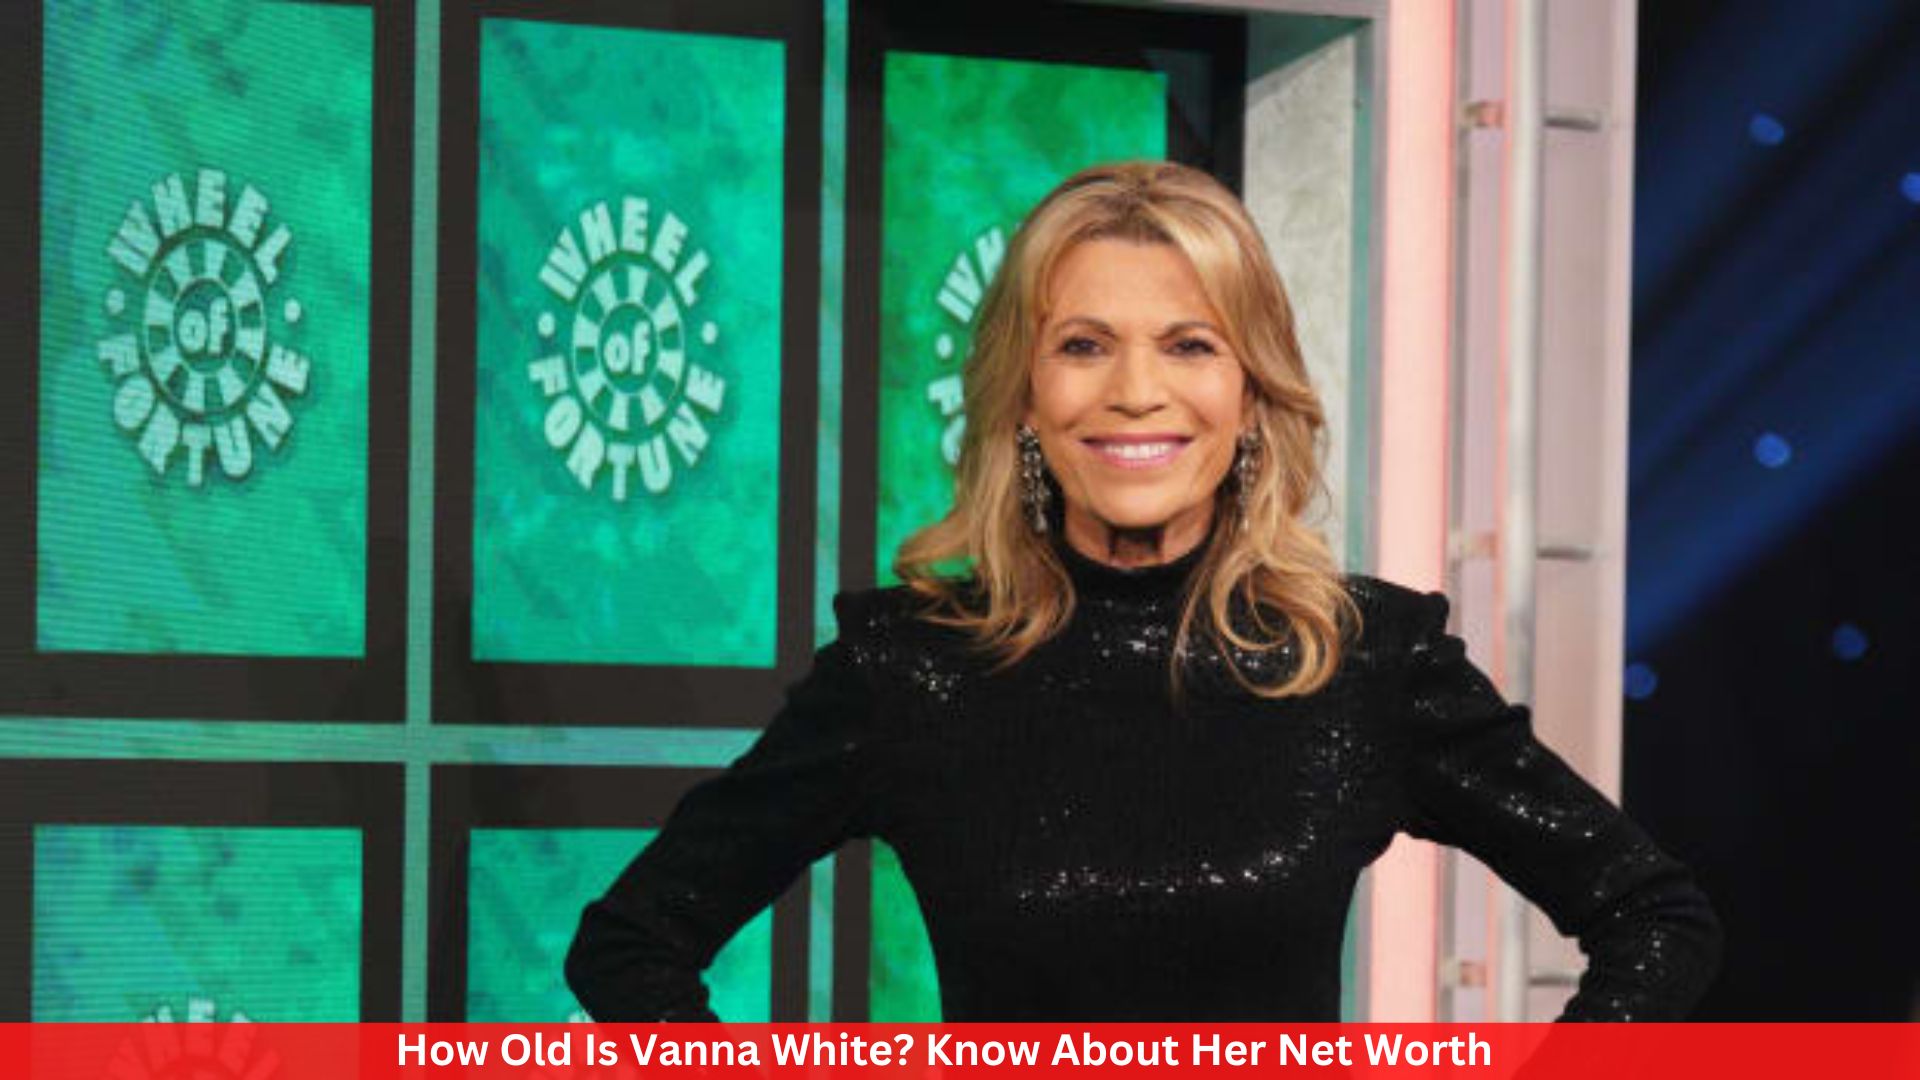 How Old Is Vanna White? Know About Her Net Worth